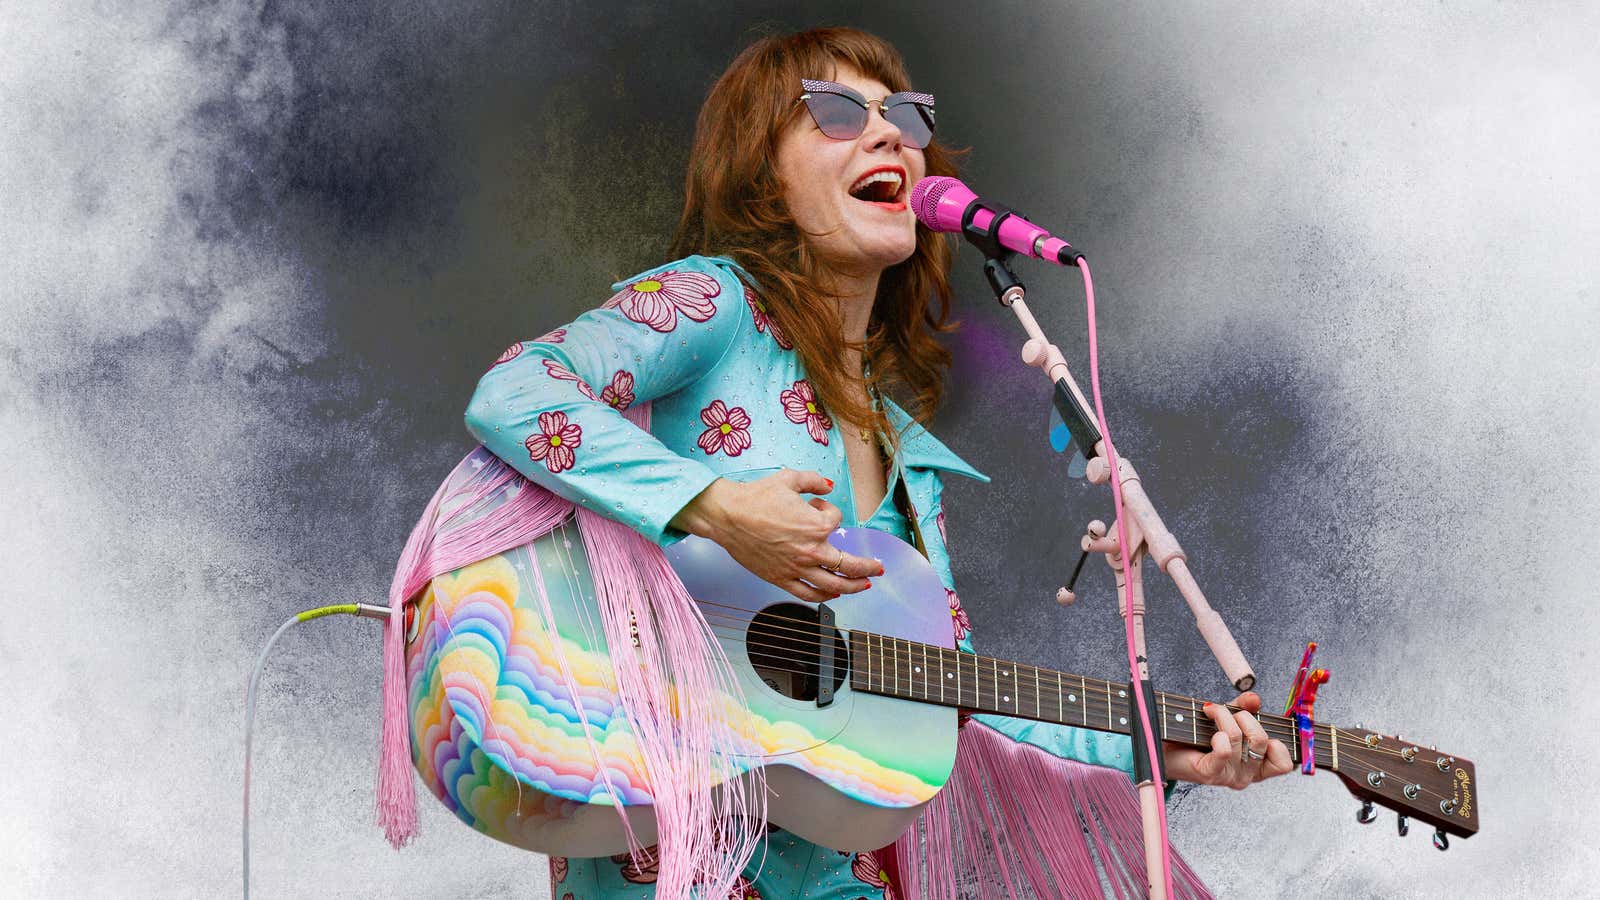 “I’m speaking about stuff I’ve never talked about”: Jenny Lewis on her best solo album to date